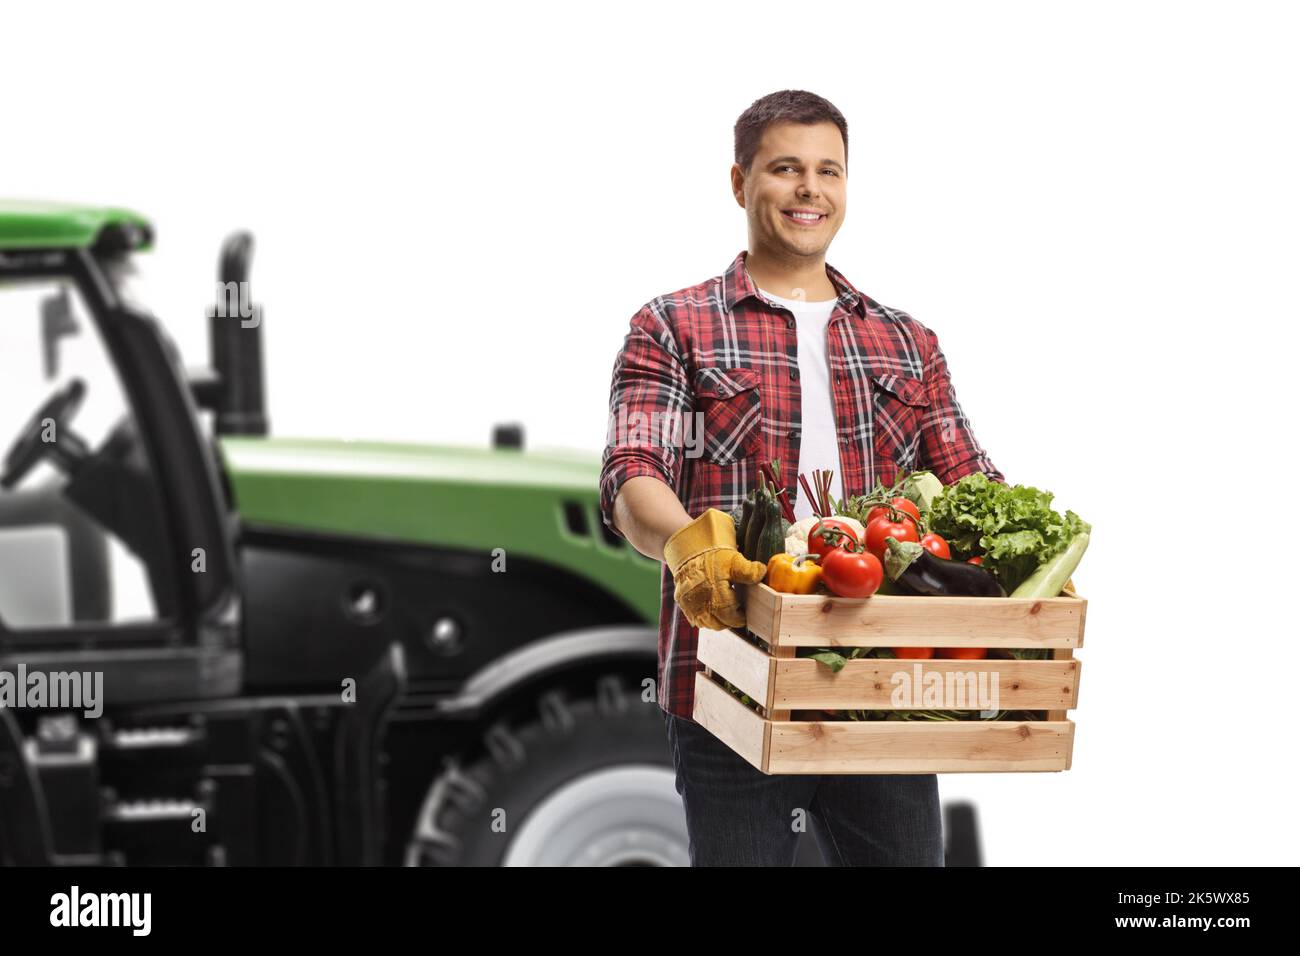 Farmer with a crate of vegetables standing in front of a tractor isolated on white background Stock Photo